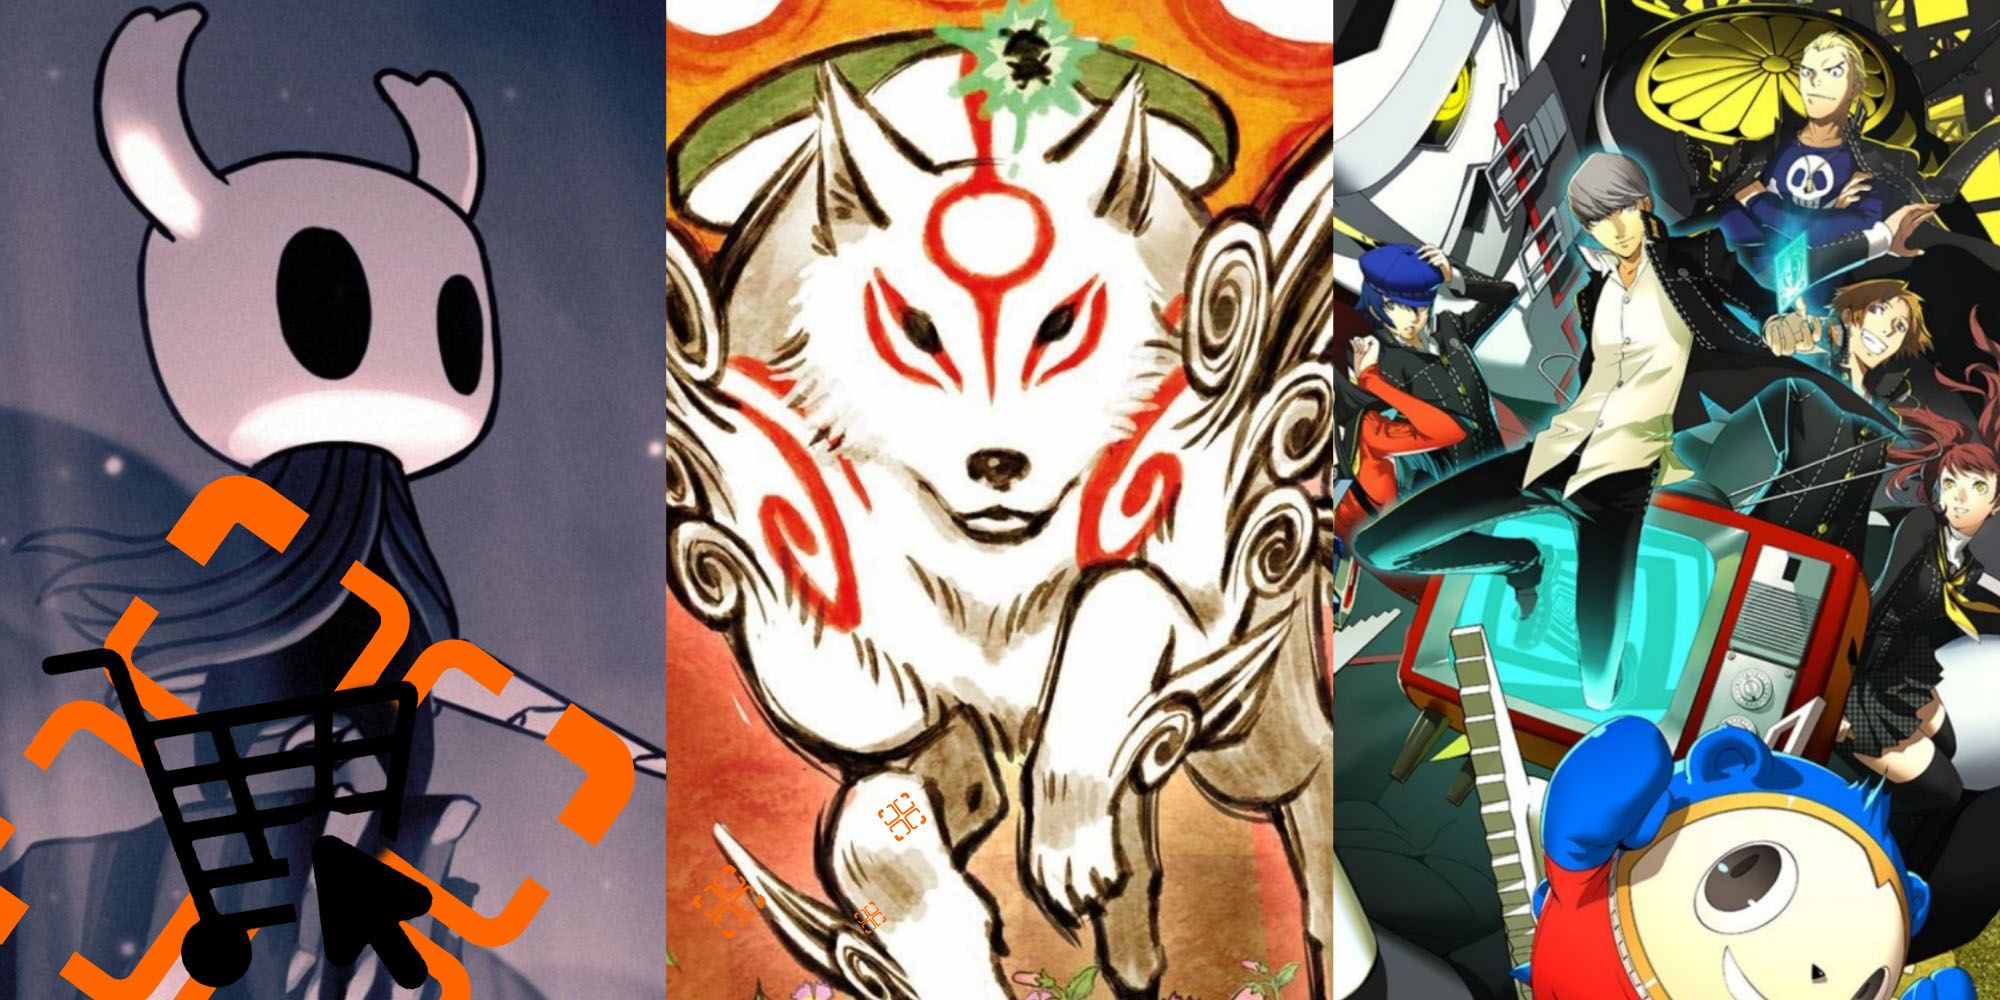 Split image screenshots of the Knight from Hollow Knight, Amaterasu from Okami, and the cast of Persona 4 Golden.